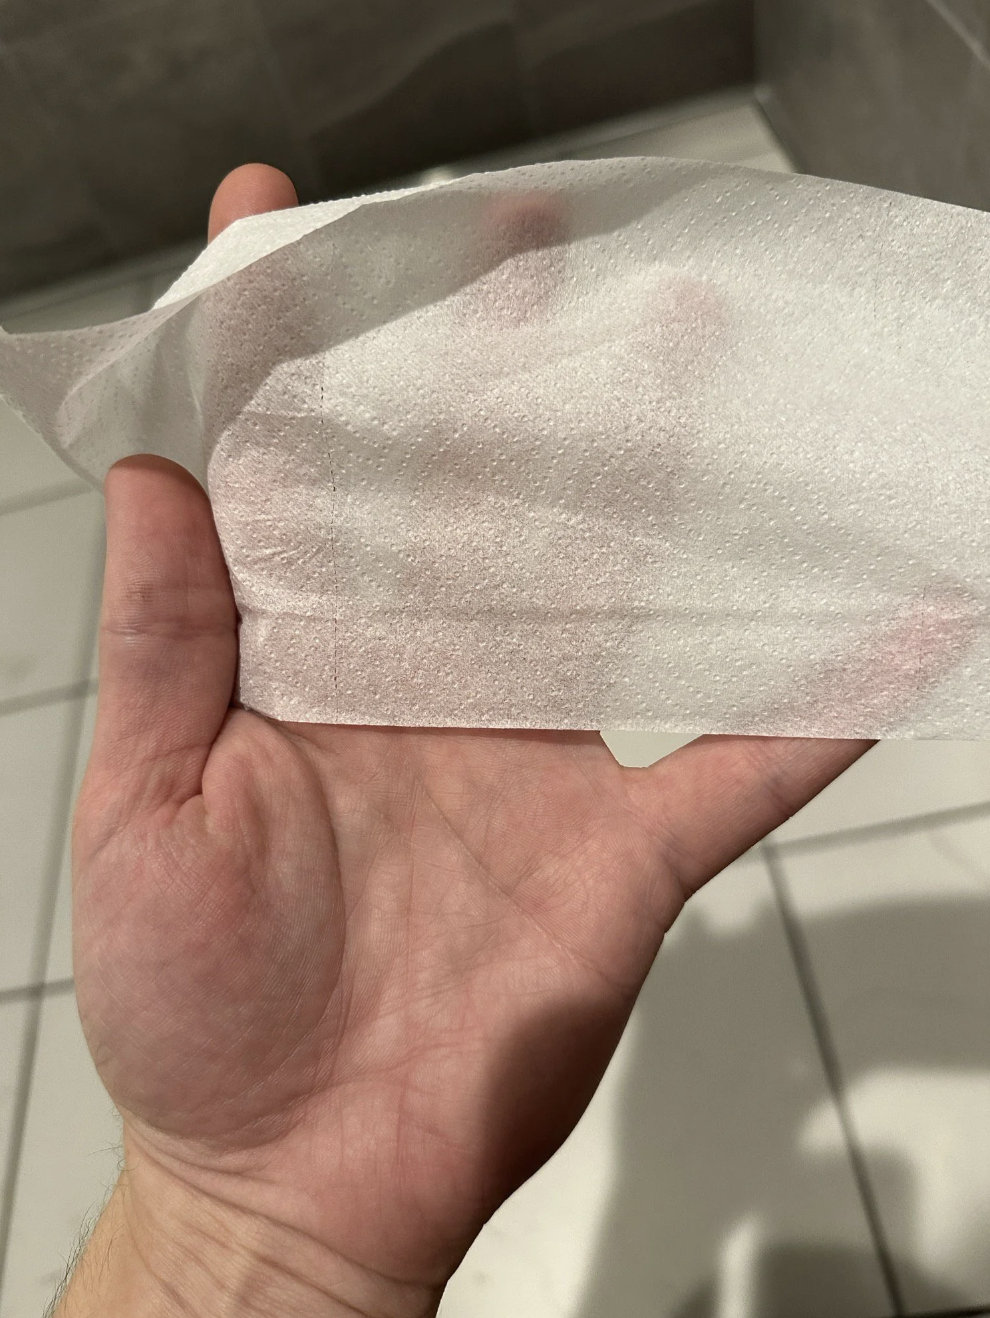 The toilet paper is so thin, you can see the person&#x27;s hand on the other side of it